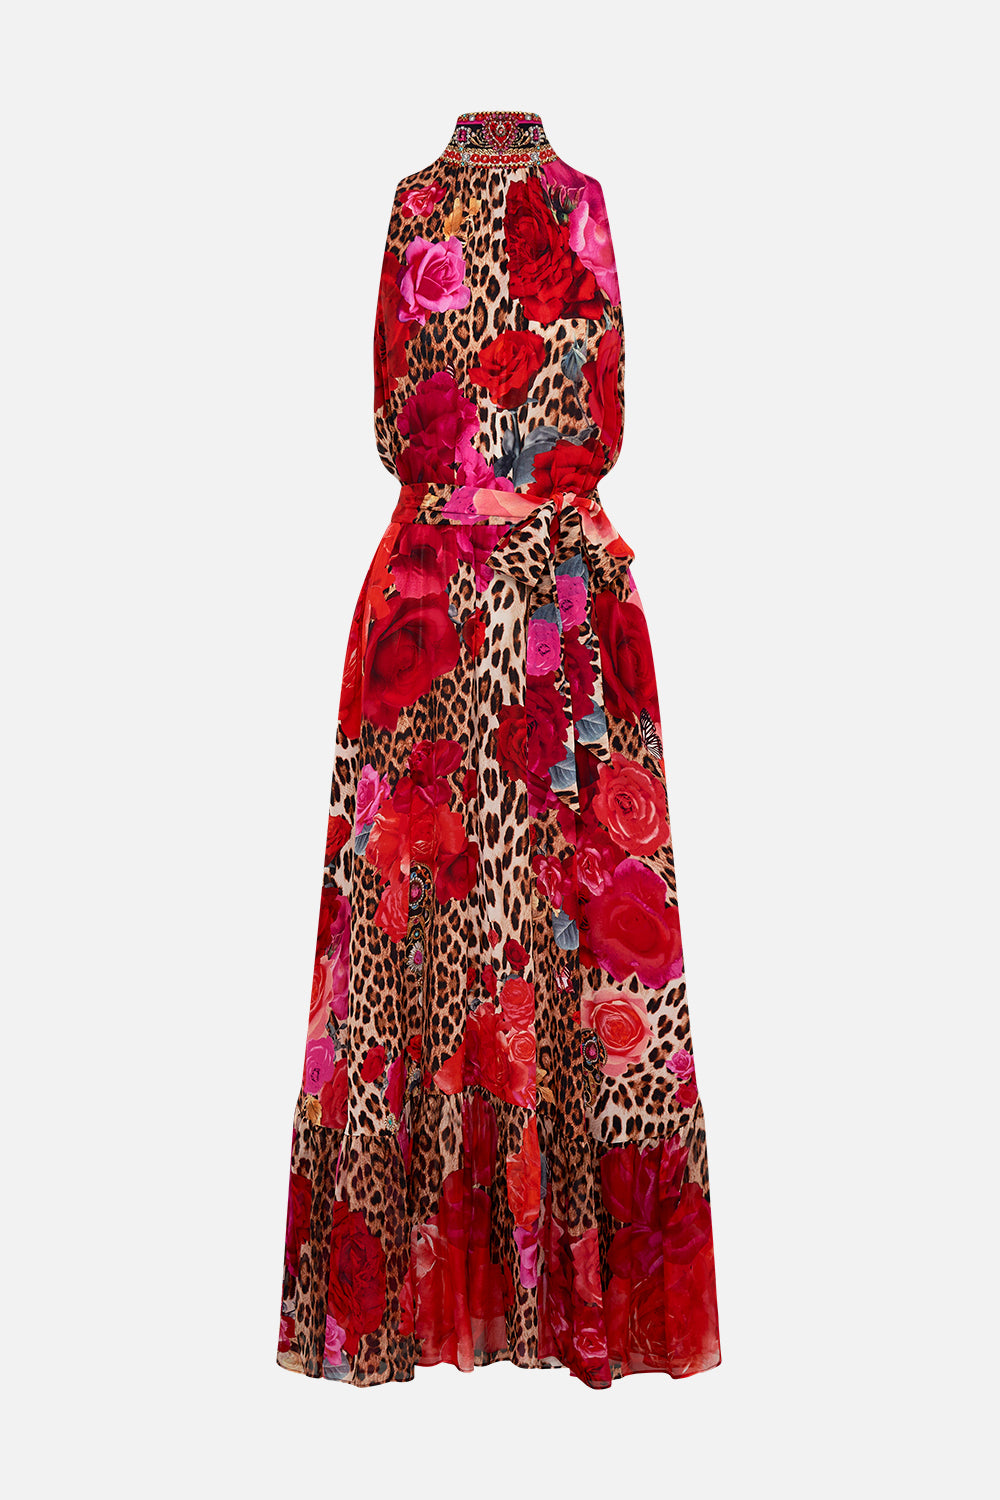 Product view of CAMILLA floral silk dress with neck tie in Heart Likle A Wildflower print